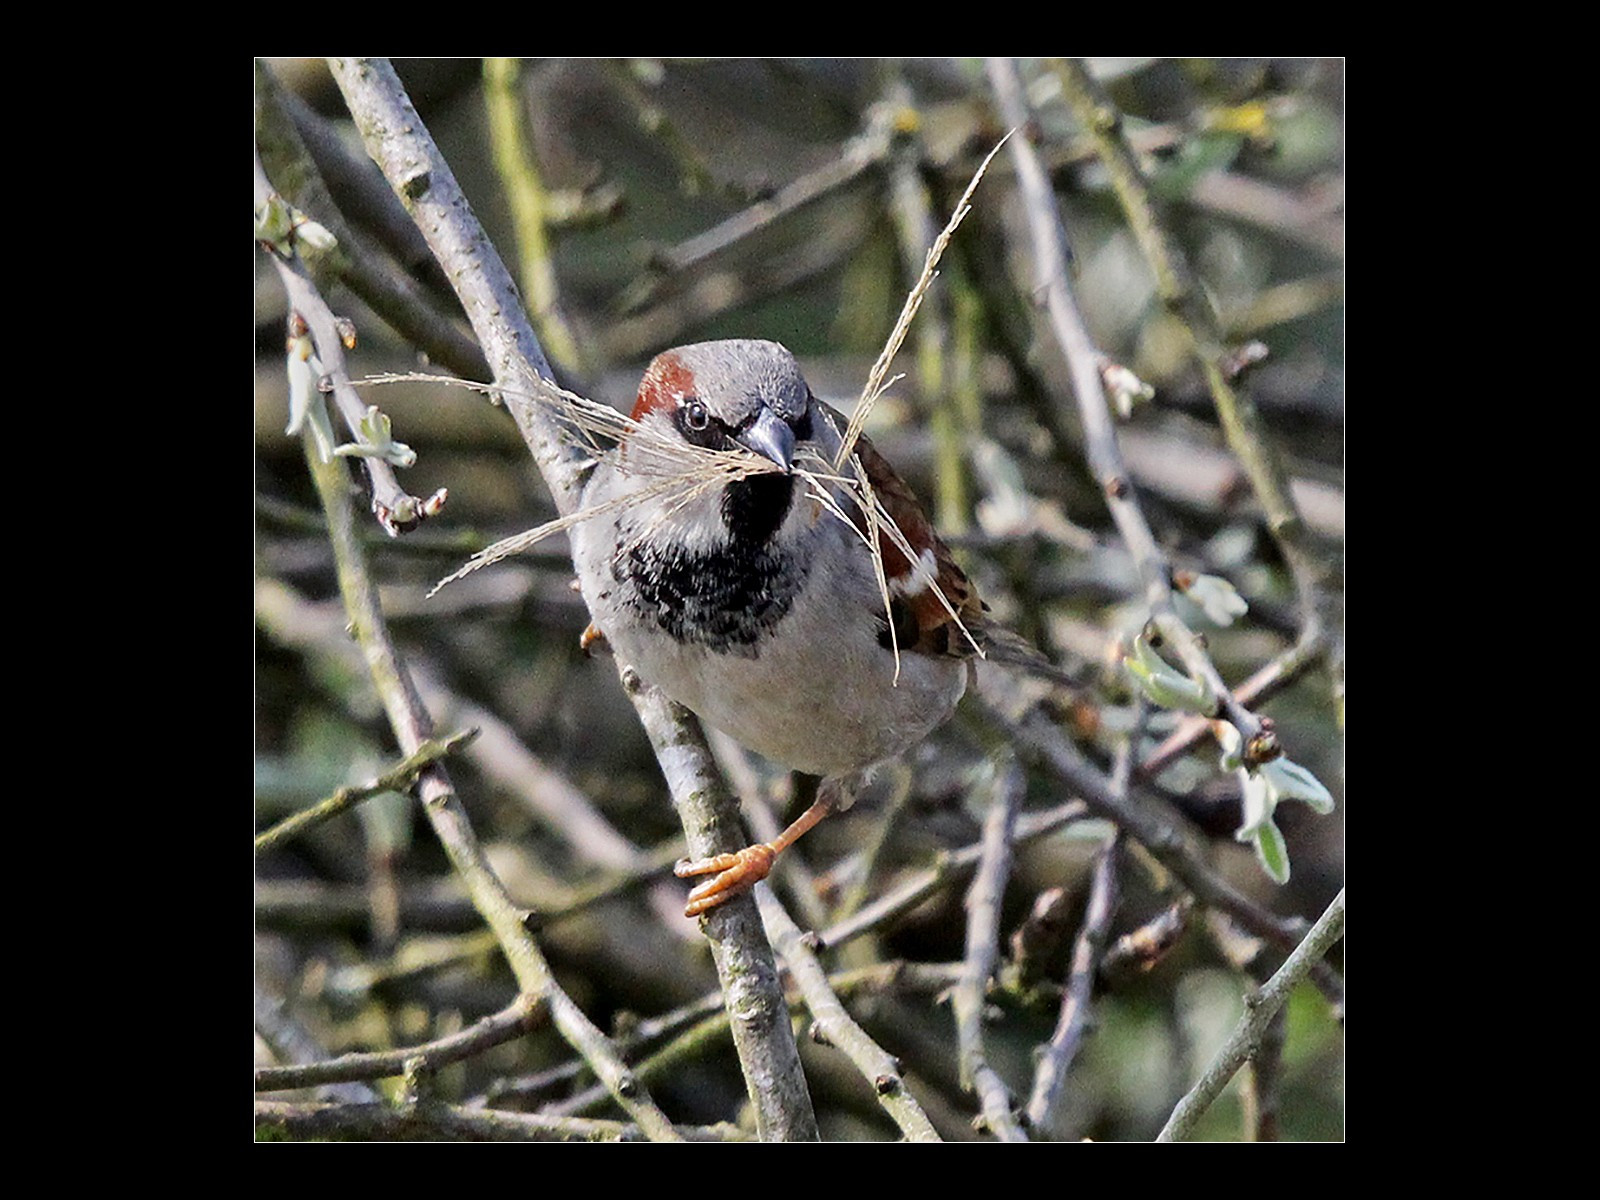 3.House Sparrow with Nesting Material